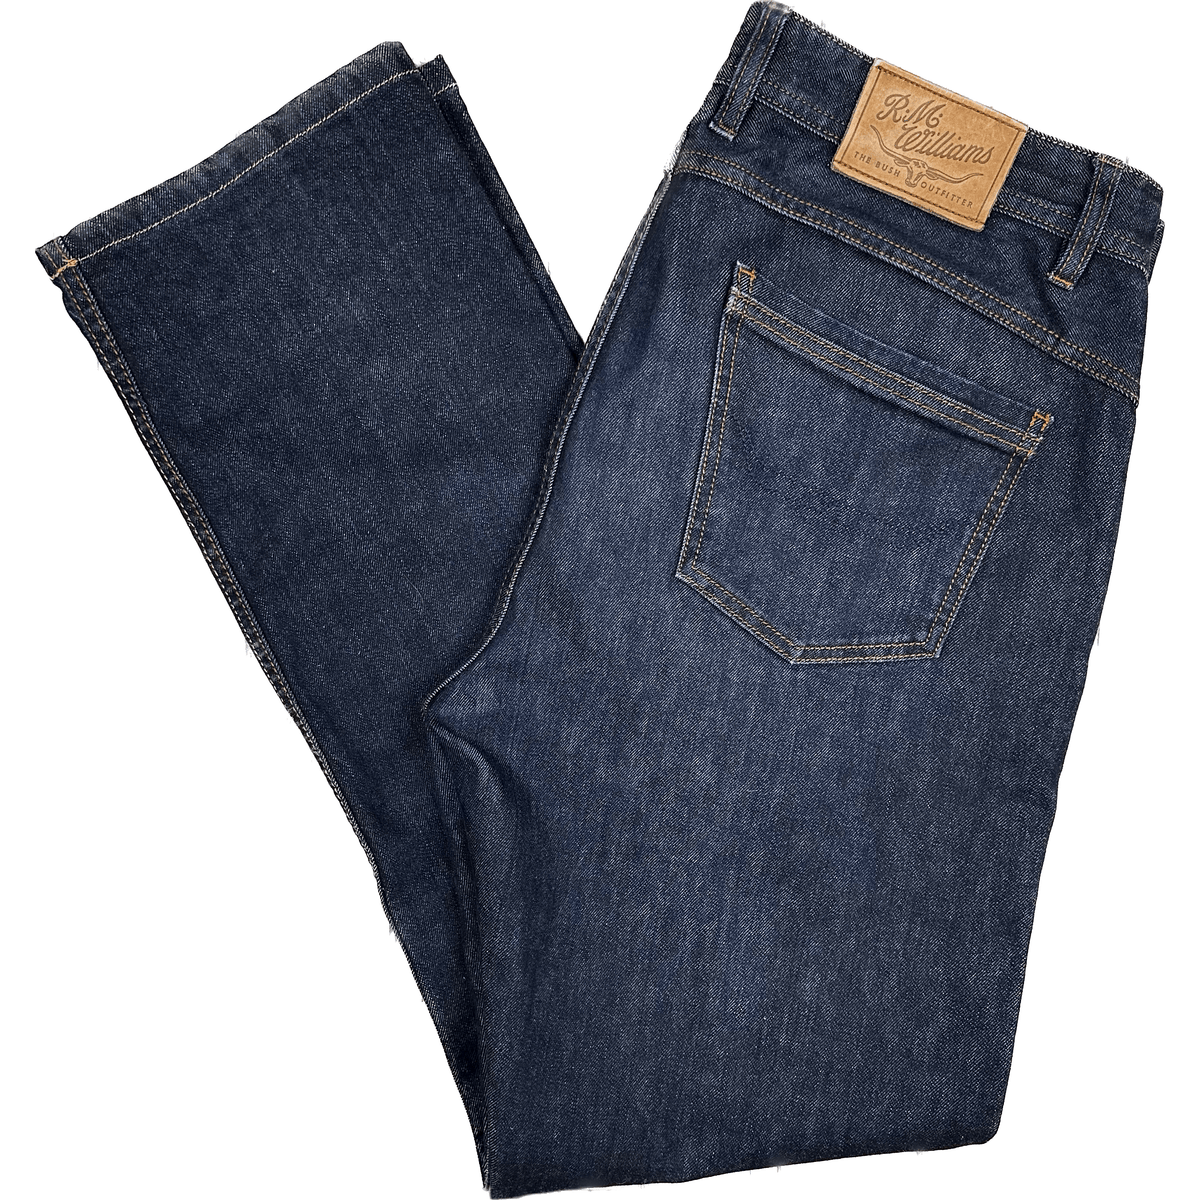 RM Williams Jeans R. M. Denim Jeans Made In Australia Size 36R 36